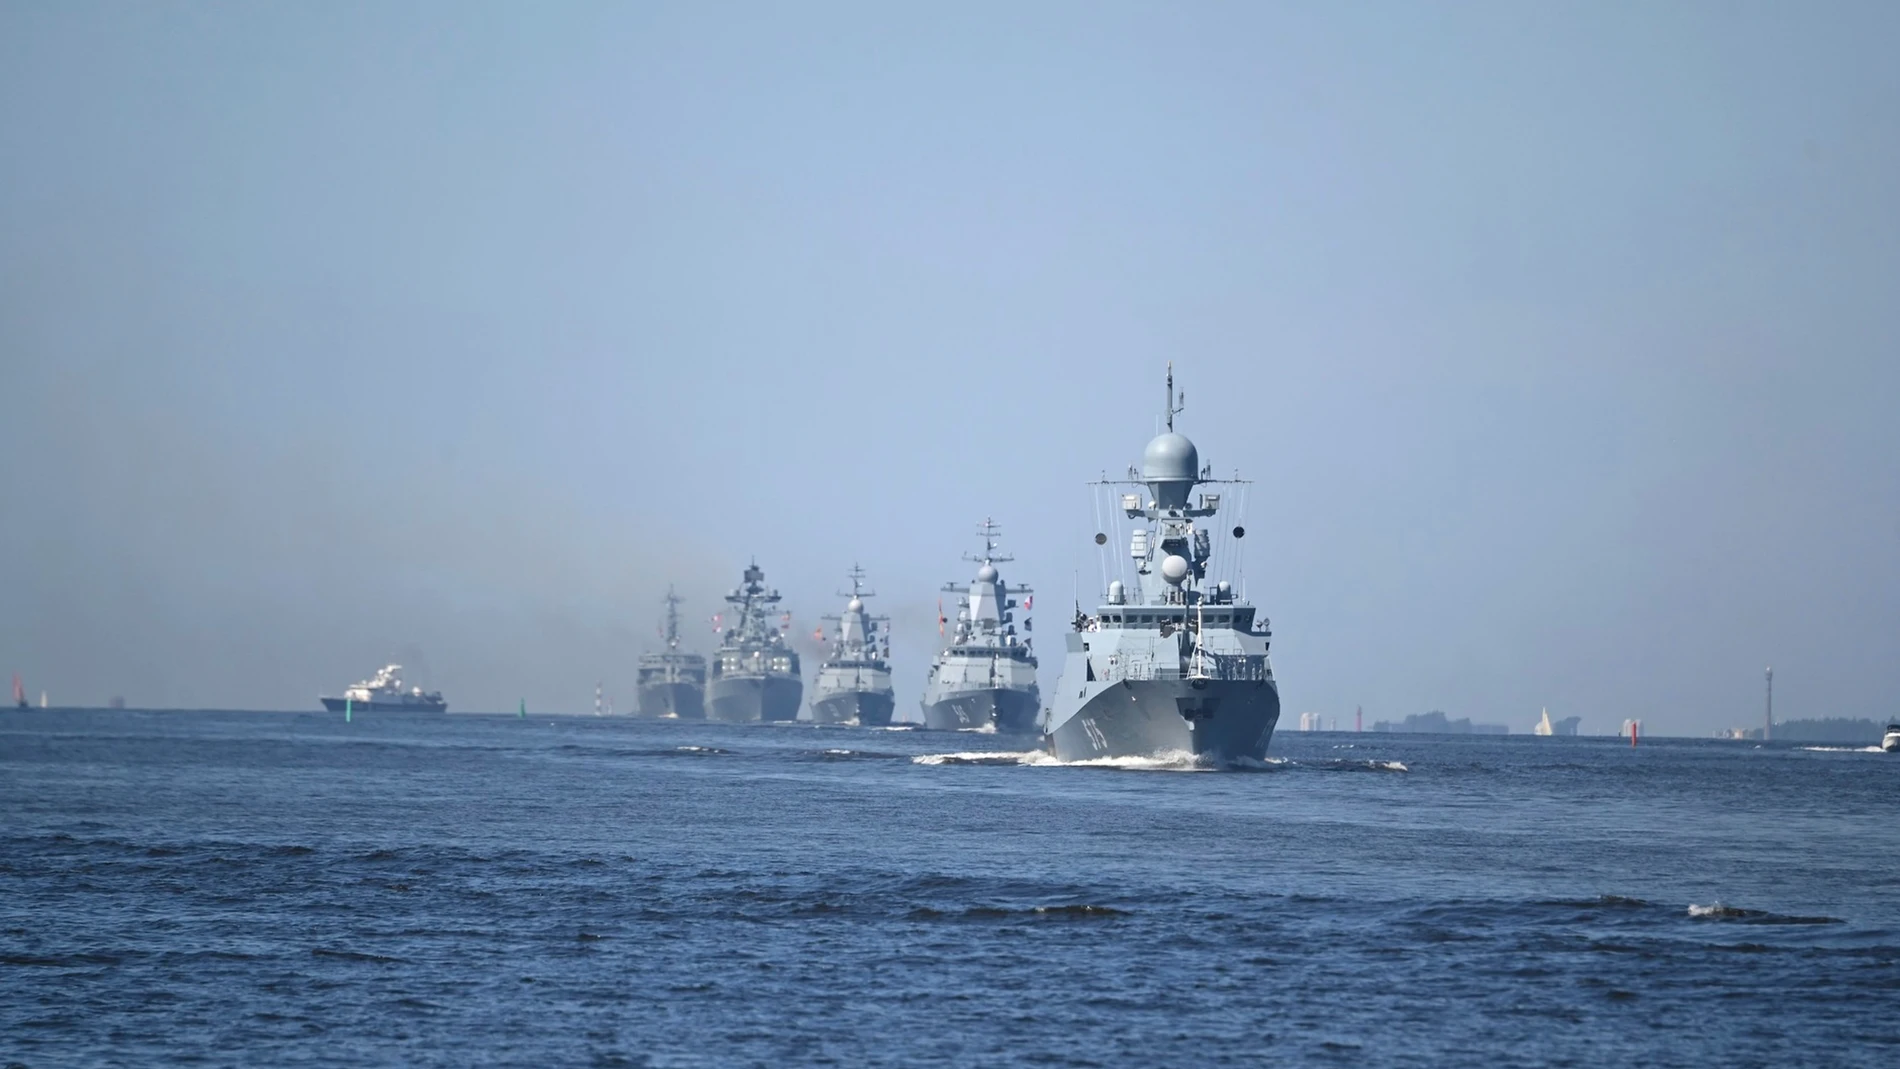 July 30, 2023, St Petersburg, Leningrad Oblast, Russia: The Russian navy Buyan class corvette Grad leads a parade or warships in formation during the Russian Navy Day parade in the Gulf of Finland, July 30, 2023 in St. Petersburg, Russia. 30/07/2023